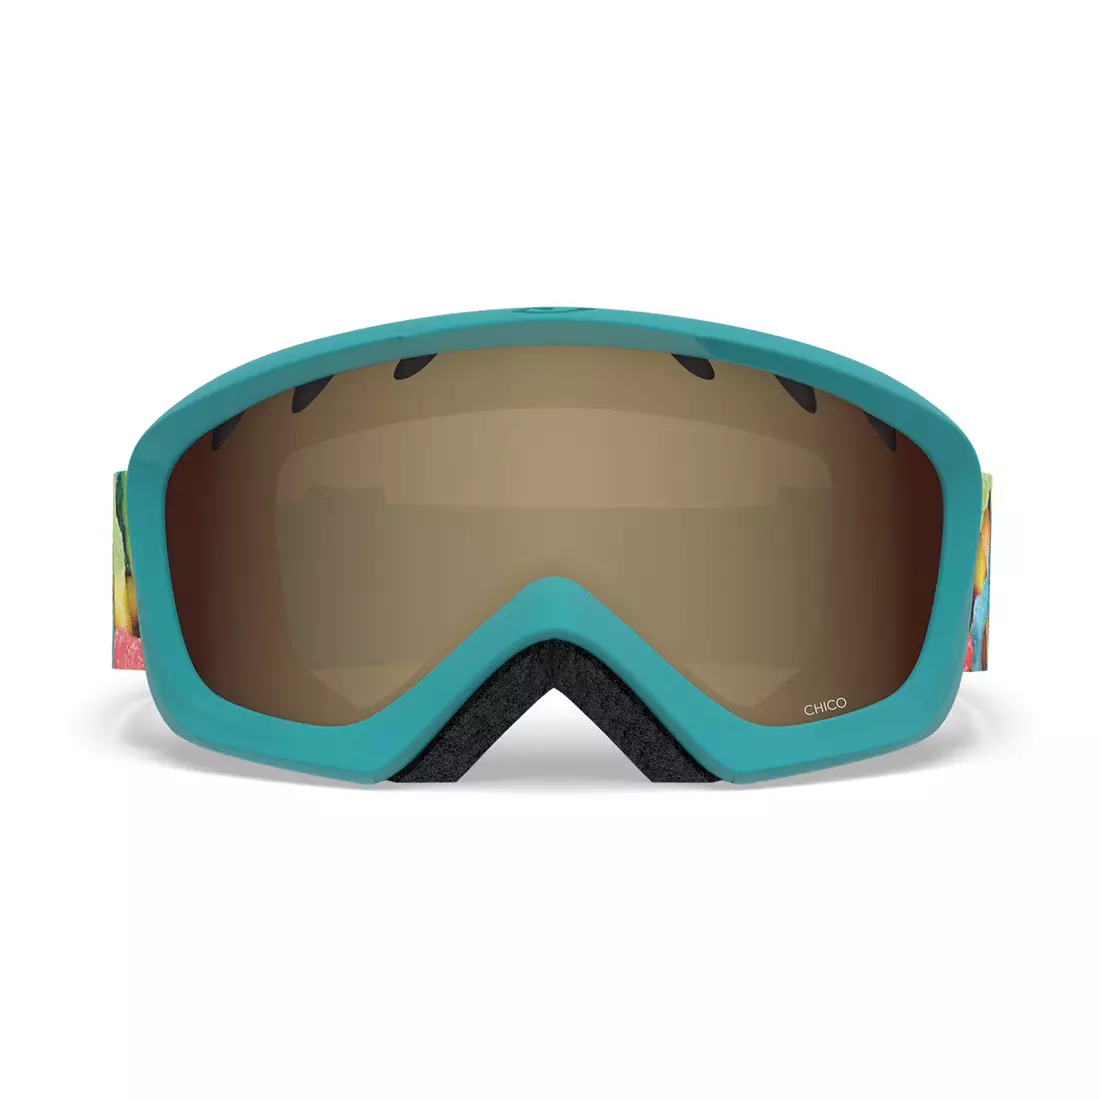 Junior ski / snowboard goggles CHICO SWEET TOOTH GR-7105421